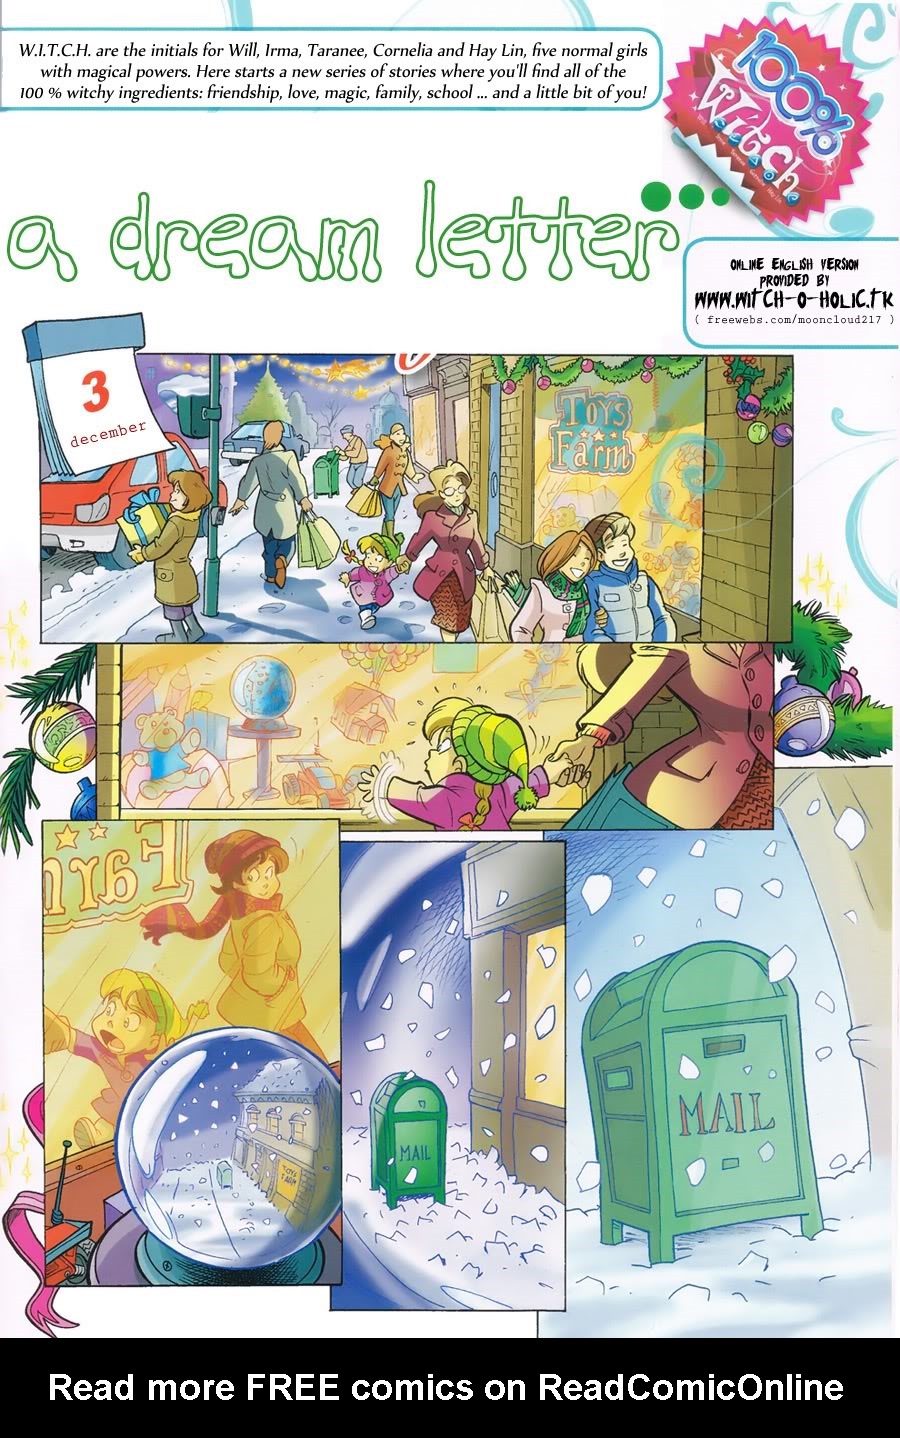 Read online W.i.t.c.h. comic -  Issue #105 - 1